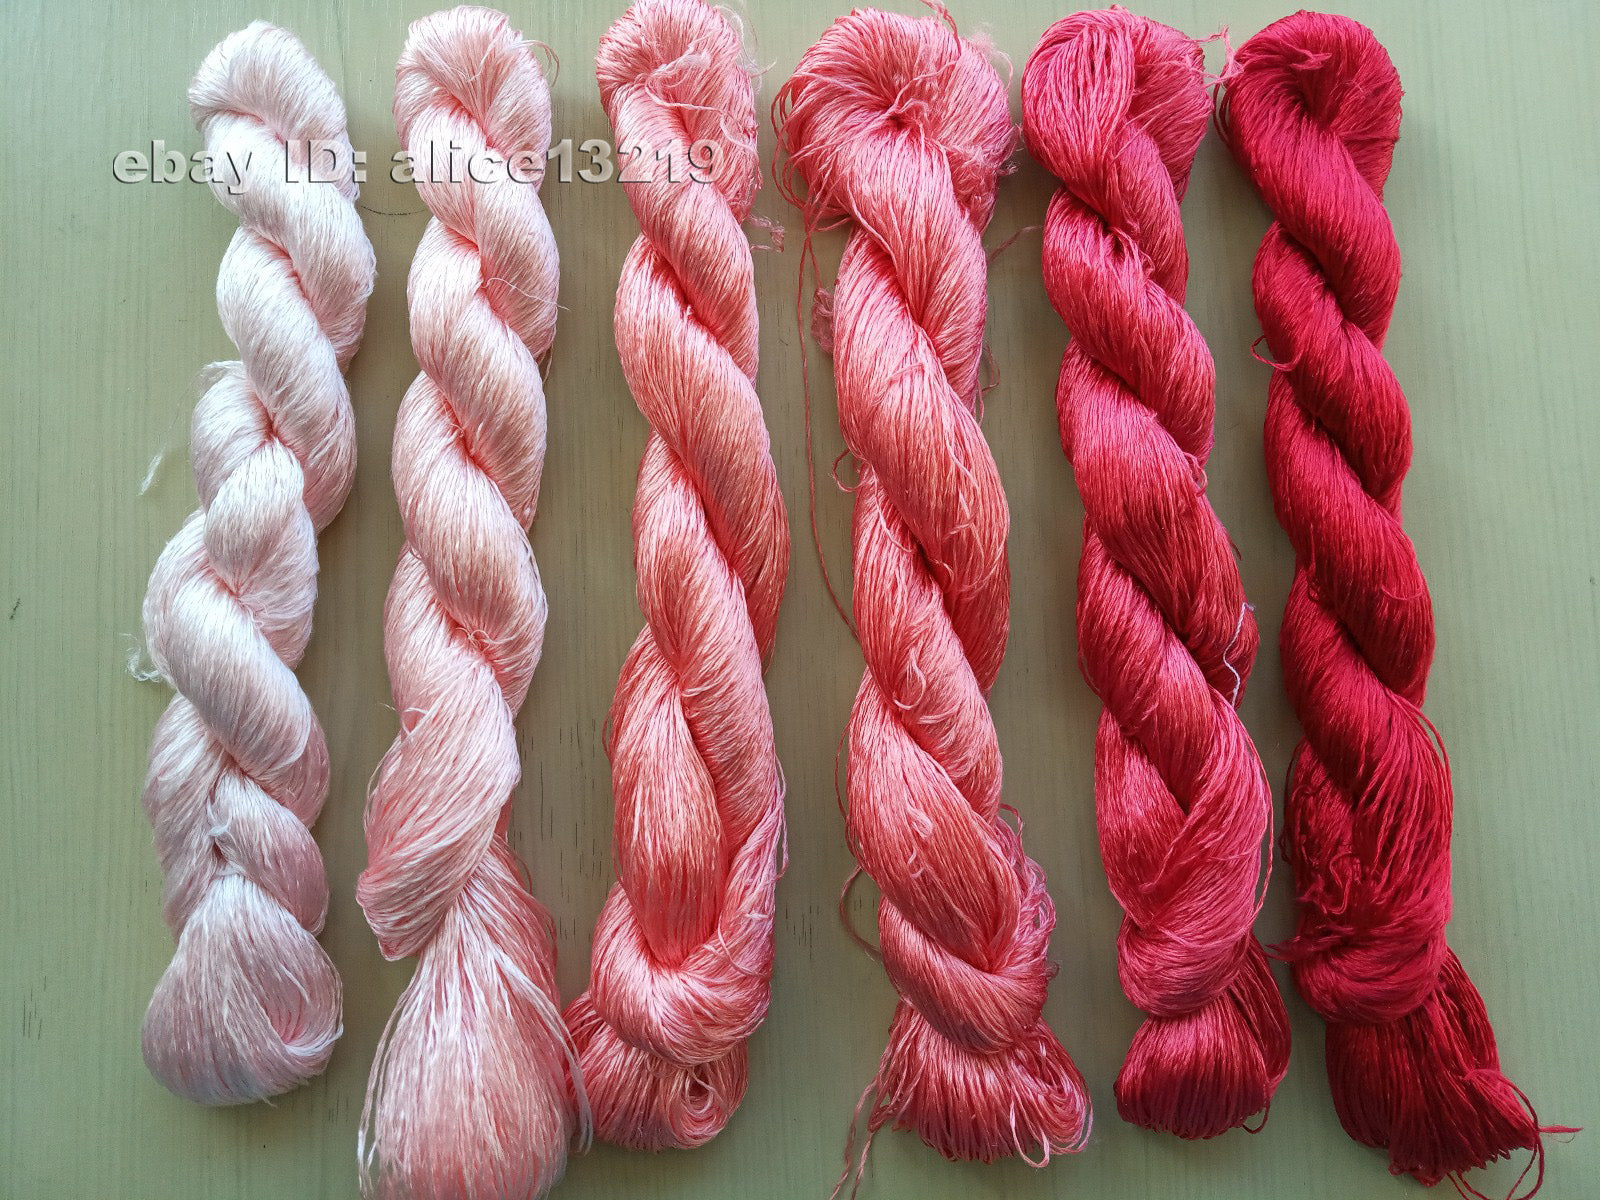 6bundles 100%real mulberry silk,hand-dyed embroidery silk floss/thread N114